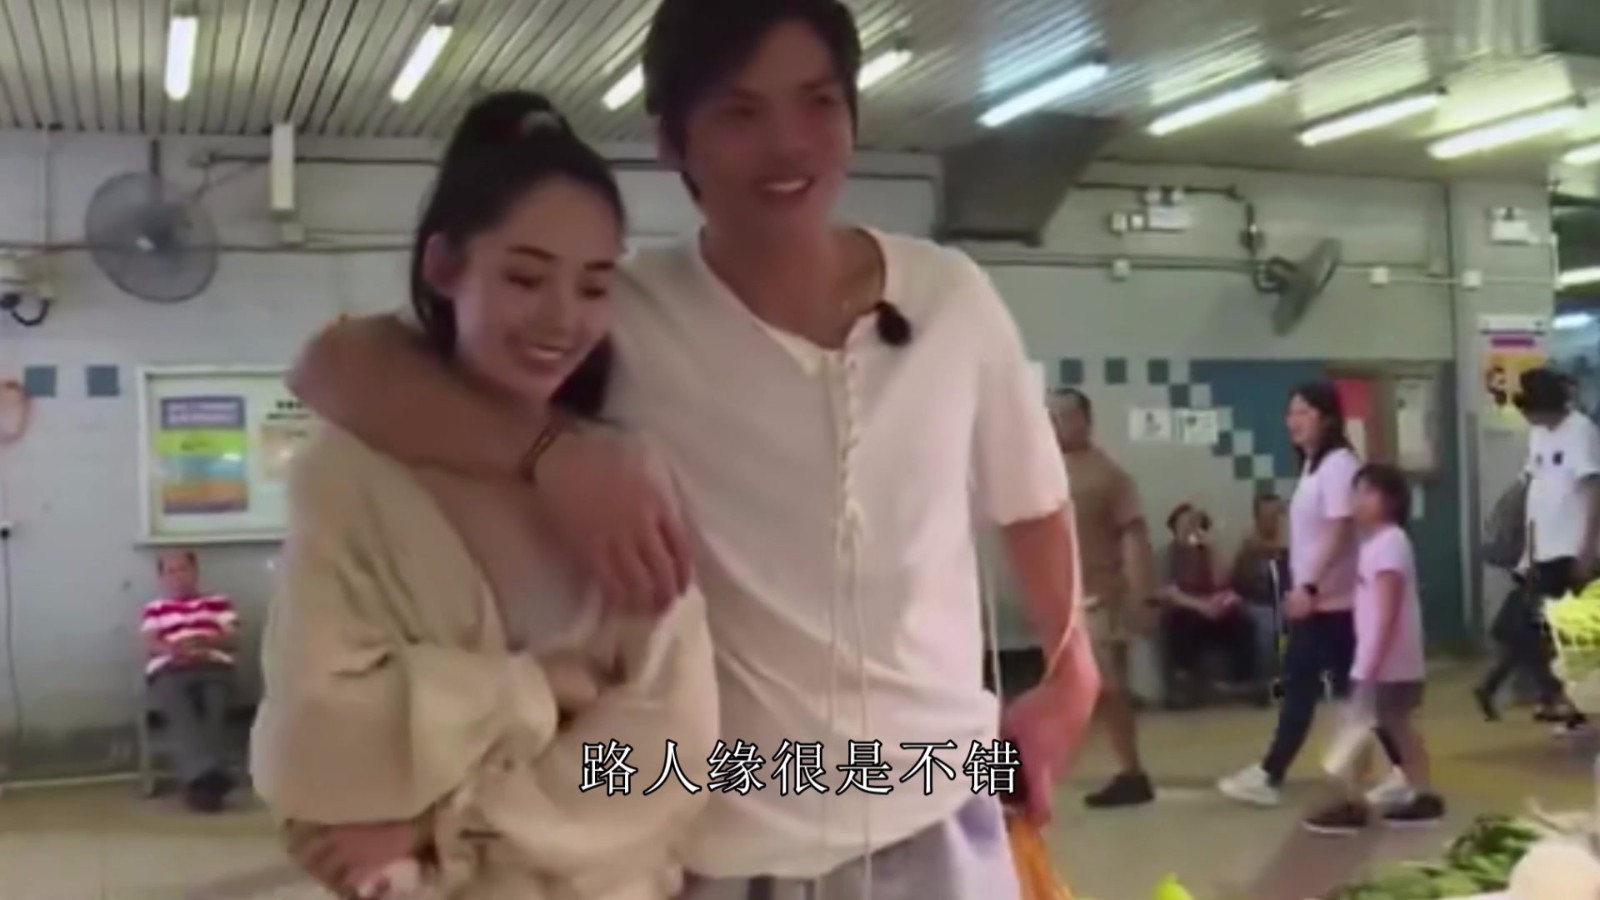 Xiangzuo suddenly embraced Guo Biting, and the next second action was bright: too gentle and intimate.